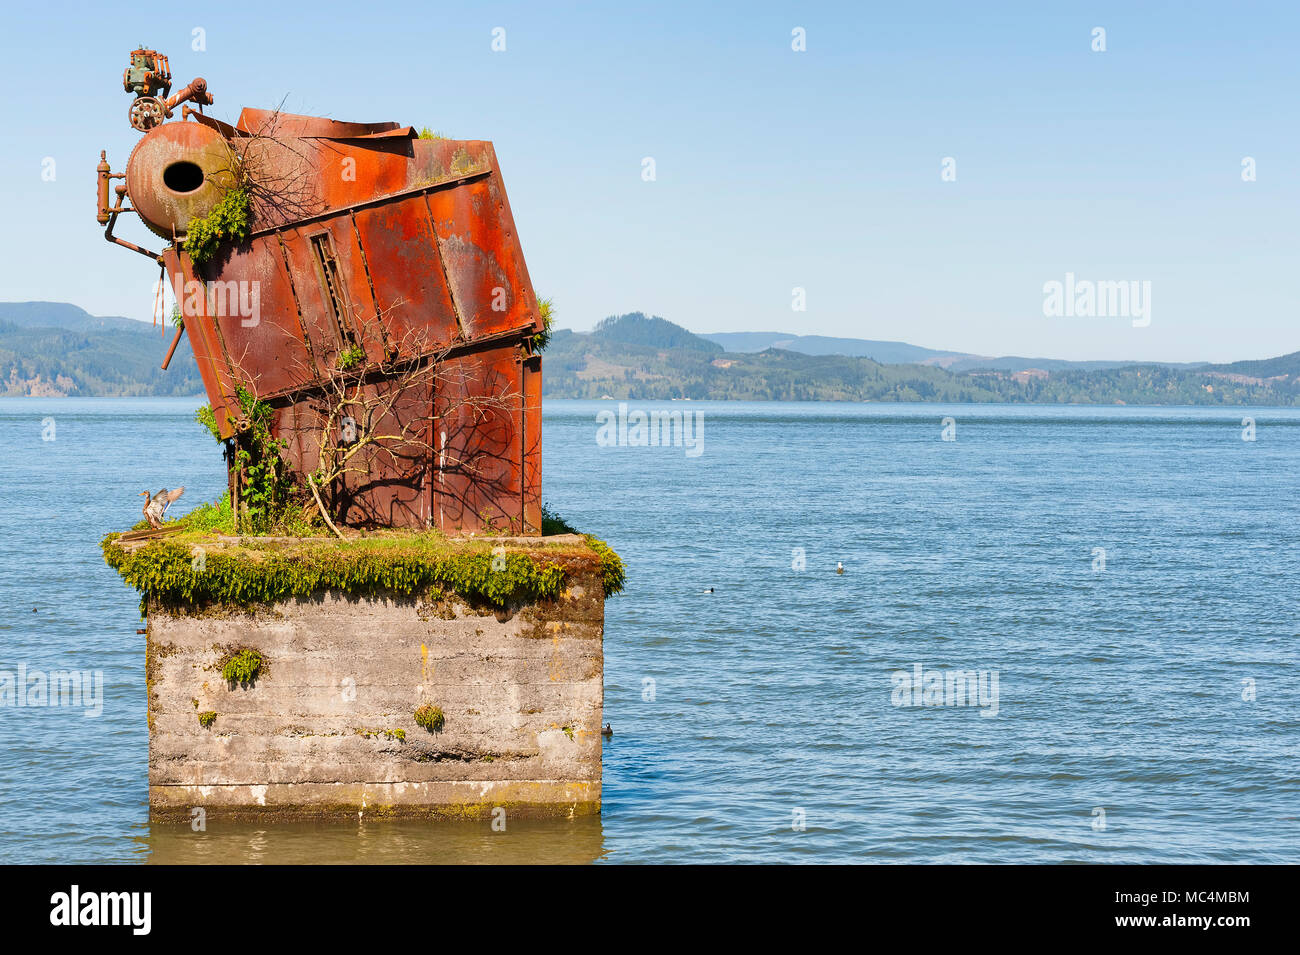 Large rusted out boiler is the remnant of White Star Cannery that was destroyed by fire over 50 years ago in Astoria, Oregon. Stock Photo